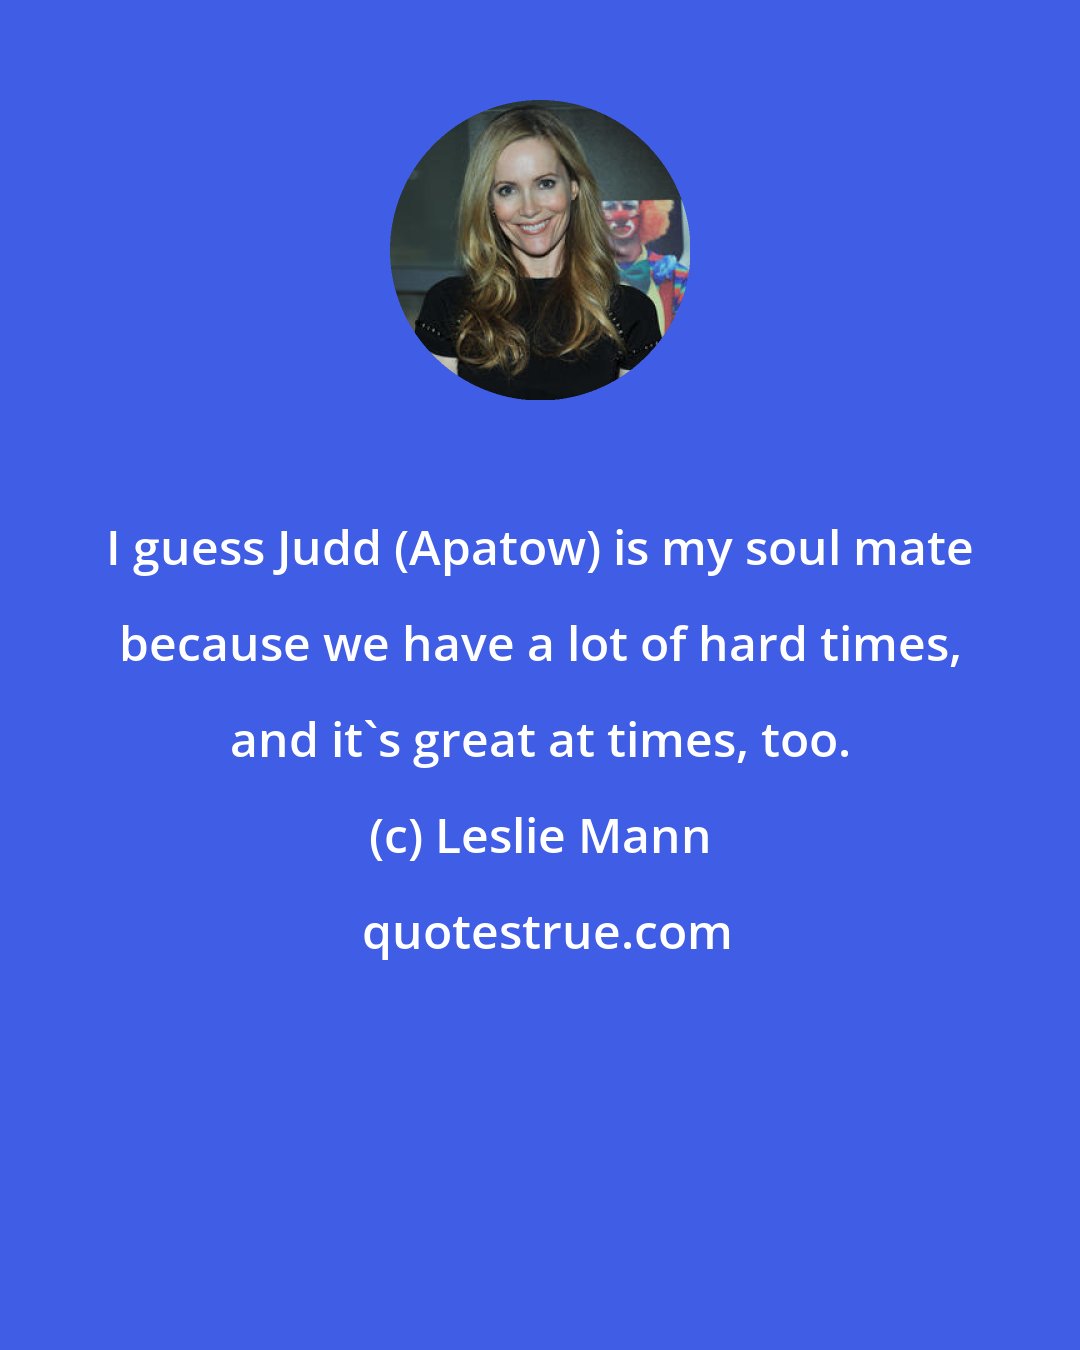 Leslie Mann: I guess Judd (Apatow) is my soul mate because we have a lot of hard times, and it's great at times, too.